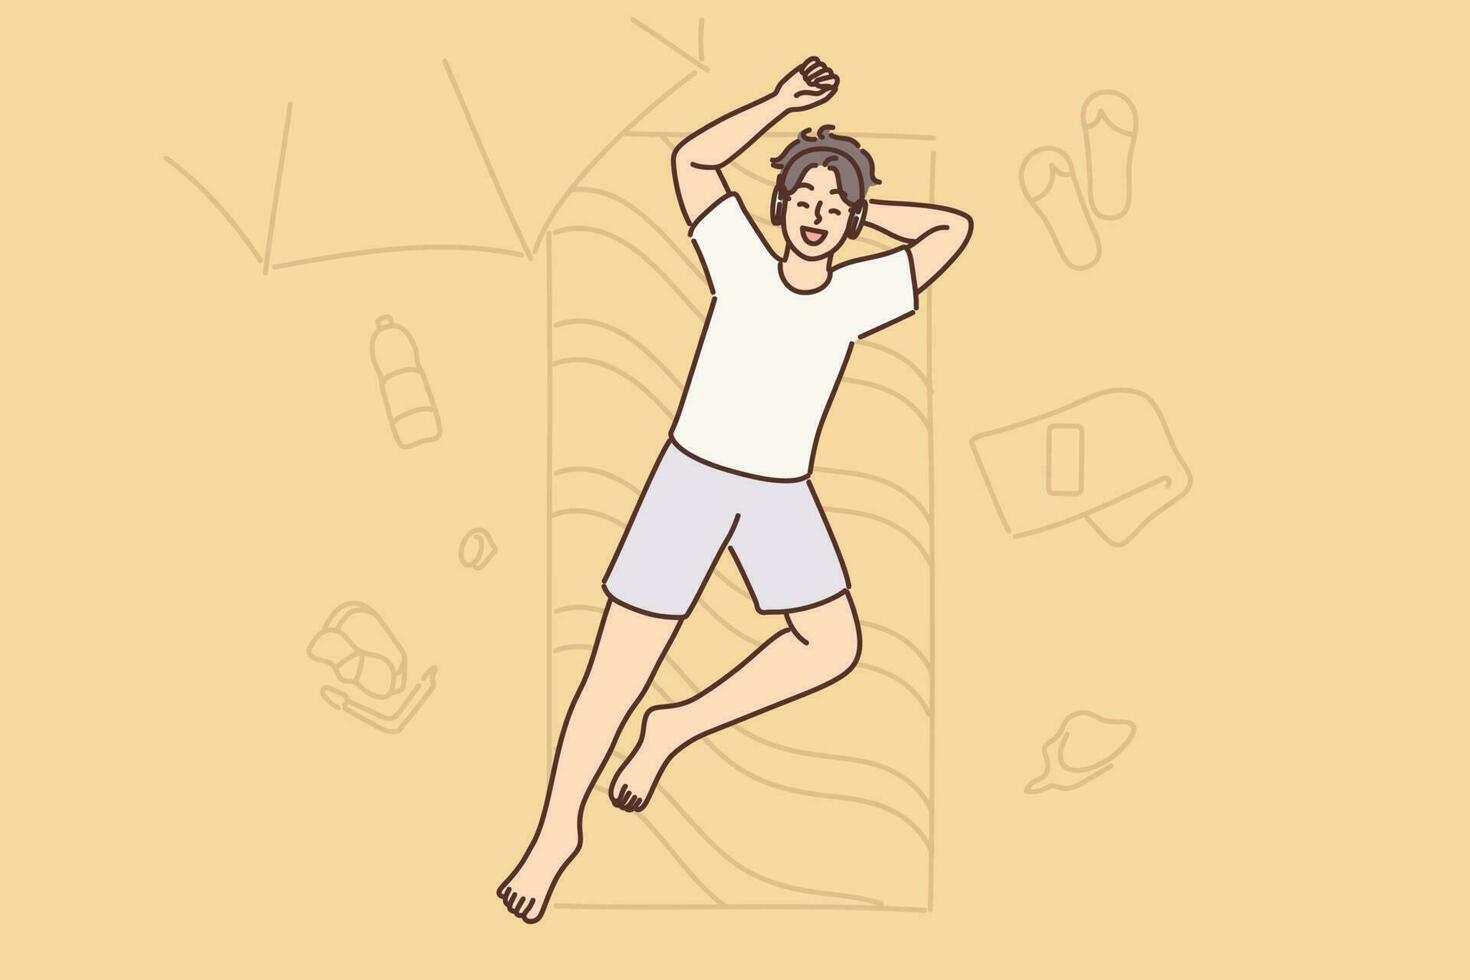 Man sunbaths lying on mattress on beach and enjoys summer holidays on hot island. Carefree guy lies on beach in clothes and listens to music relaxing in tropical resort near ocean. vector